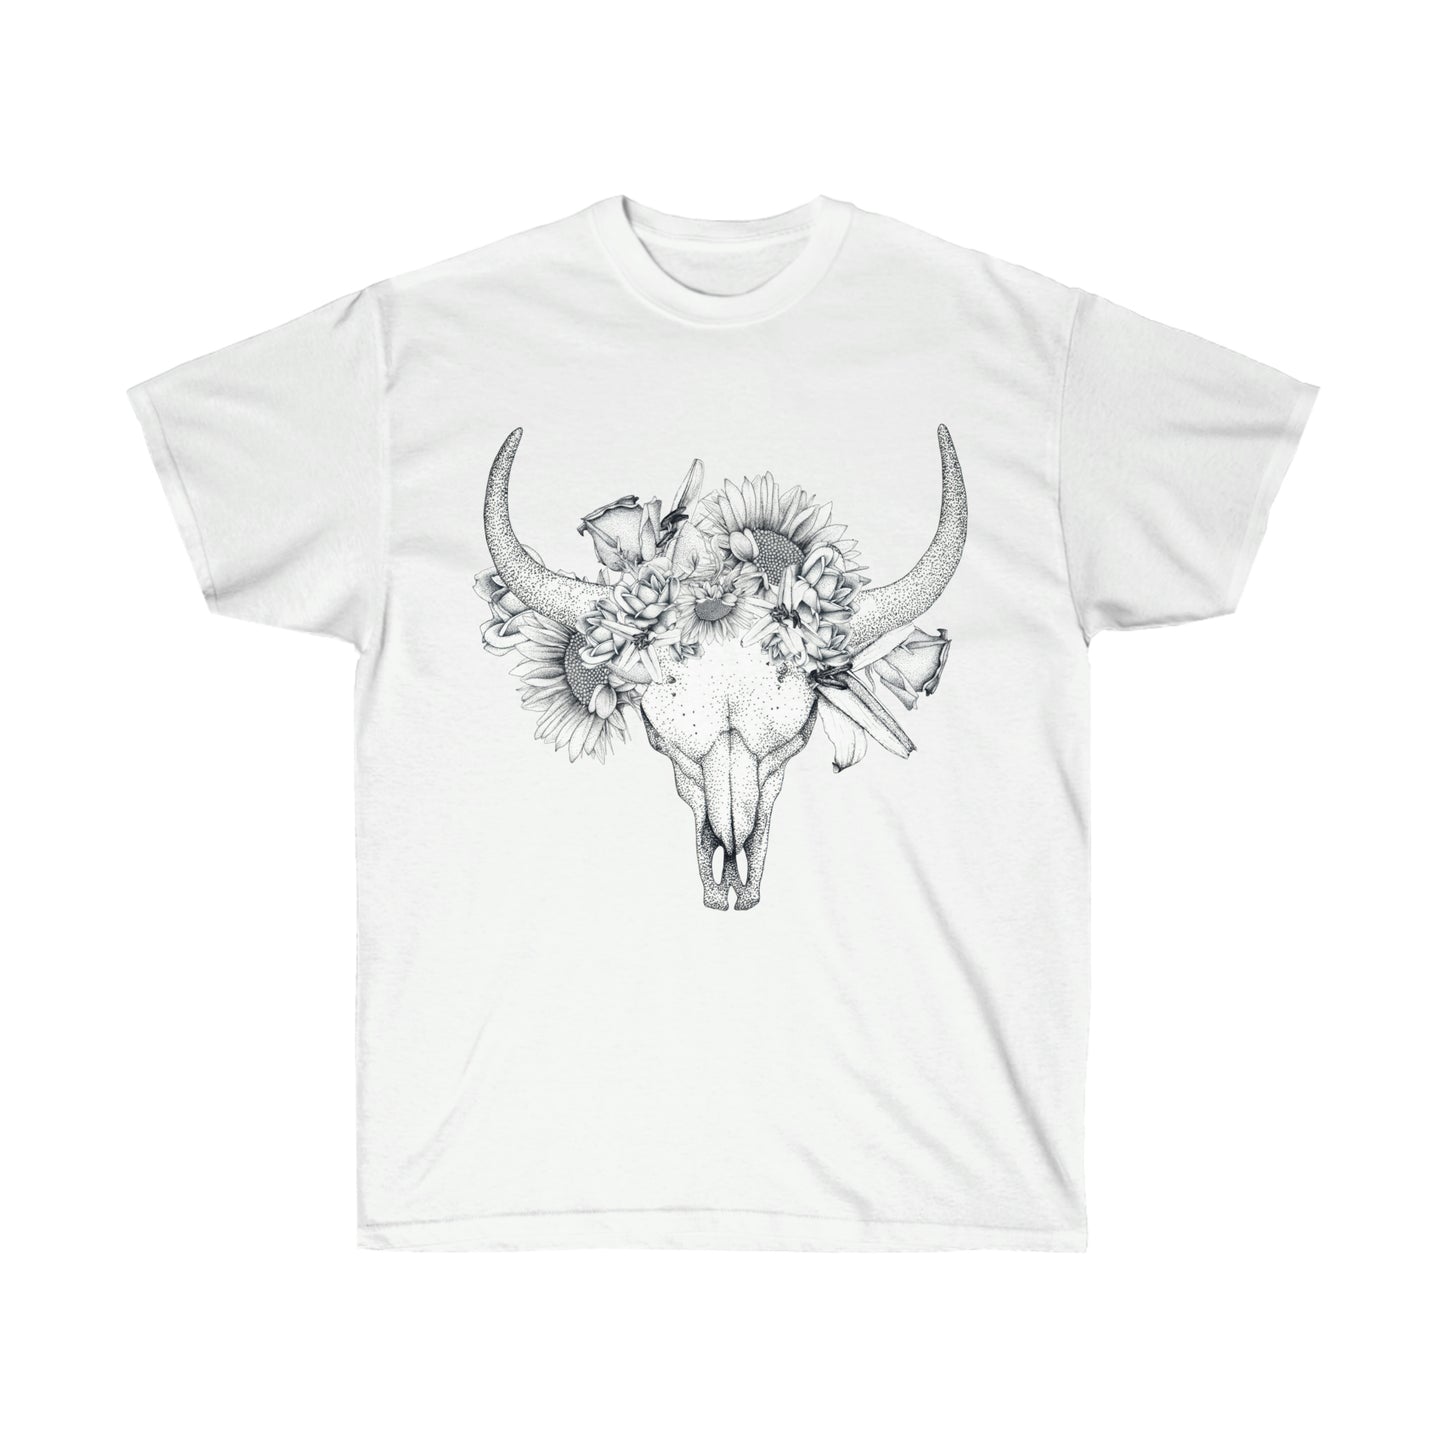 The Old Buffalo Graphic Tee